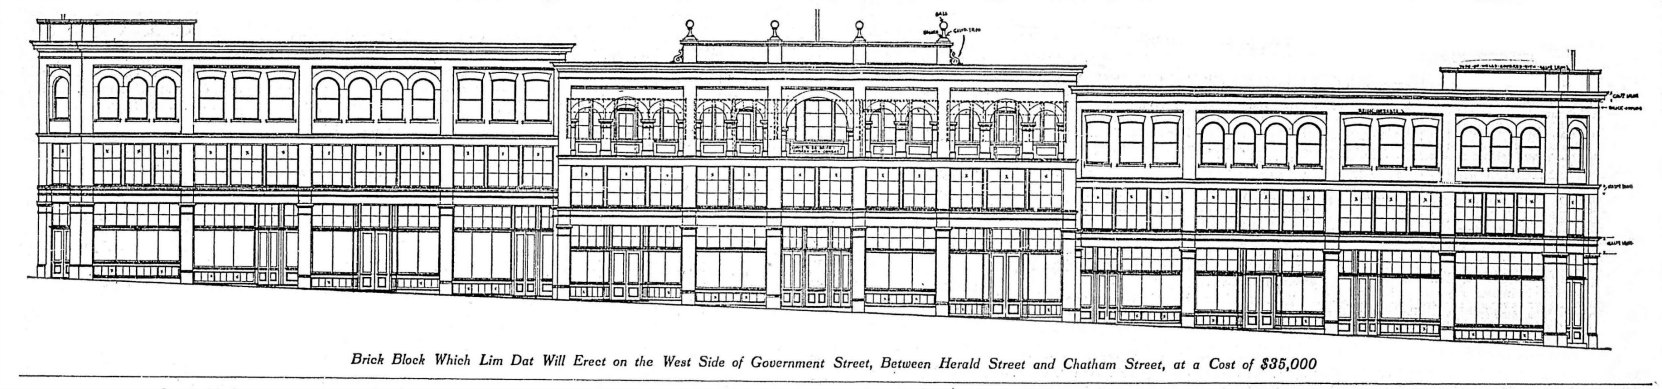 1909 architectural drawing of the Lim Dat Building, 1802-1826 Government Street